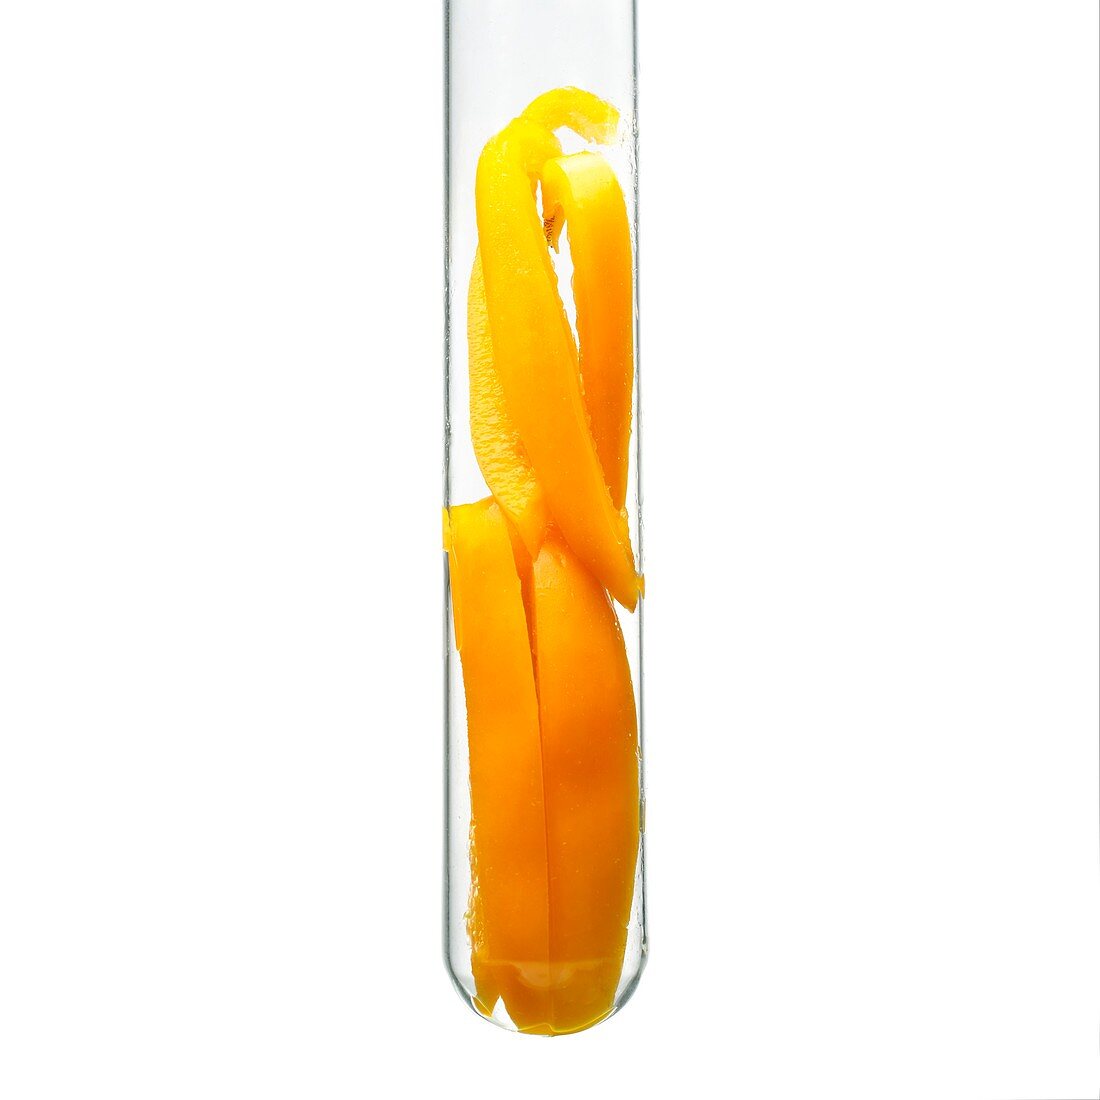 Pepper slices in a test tube